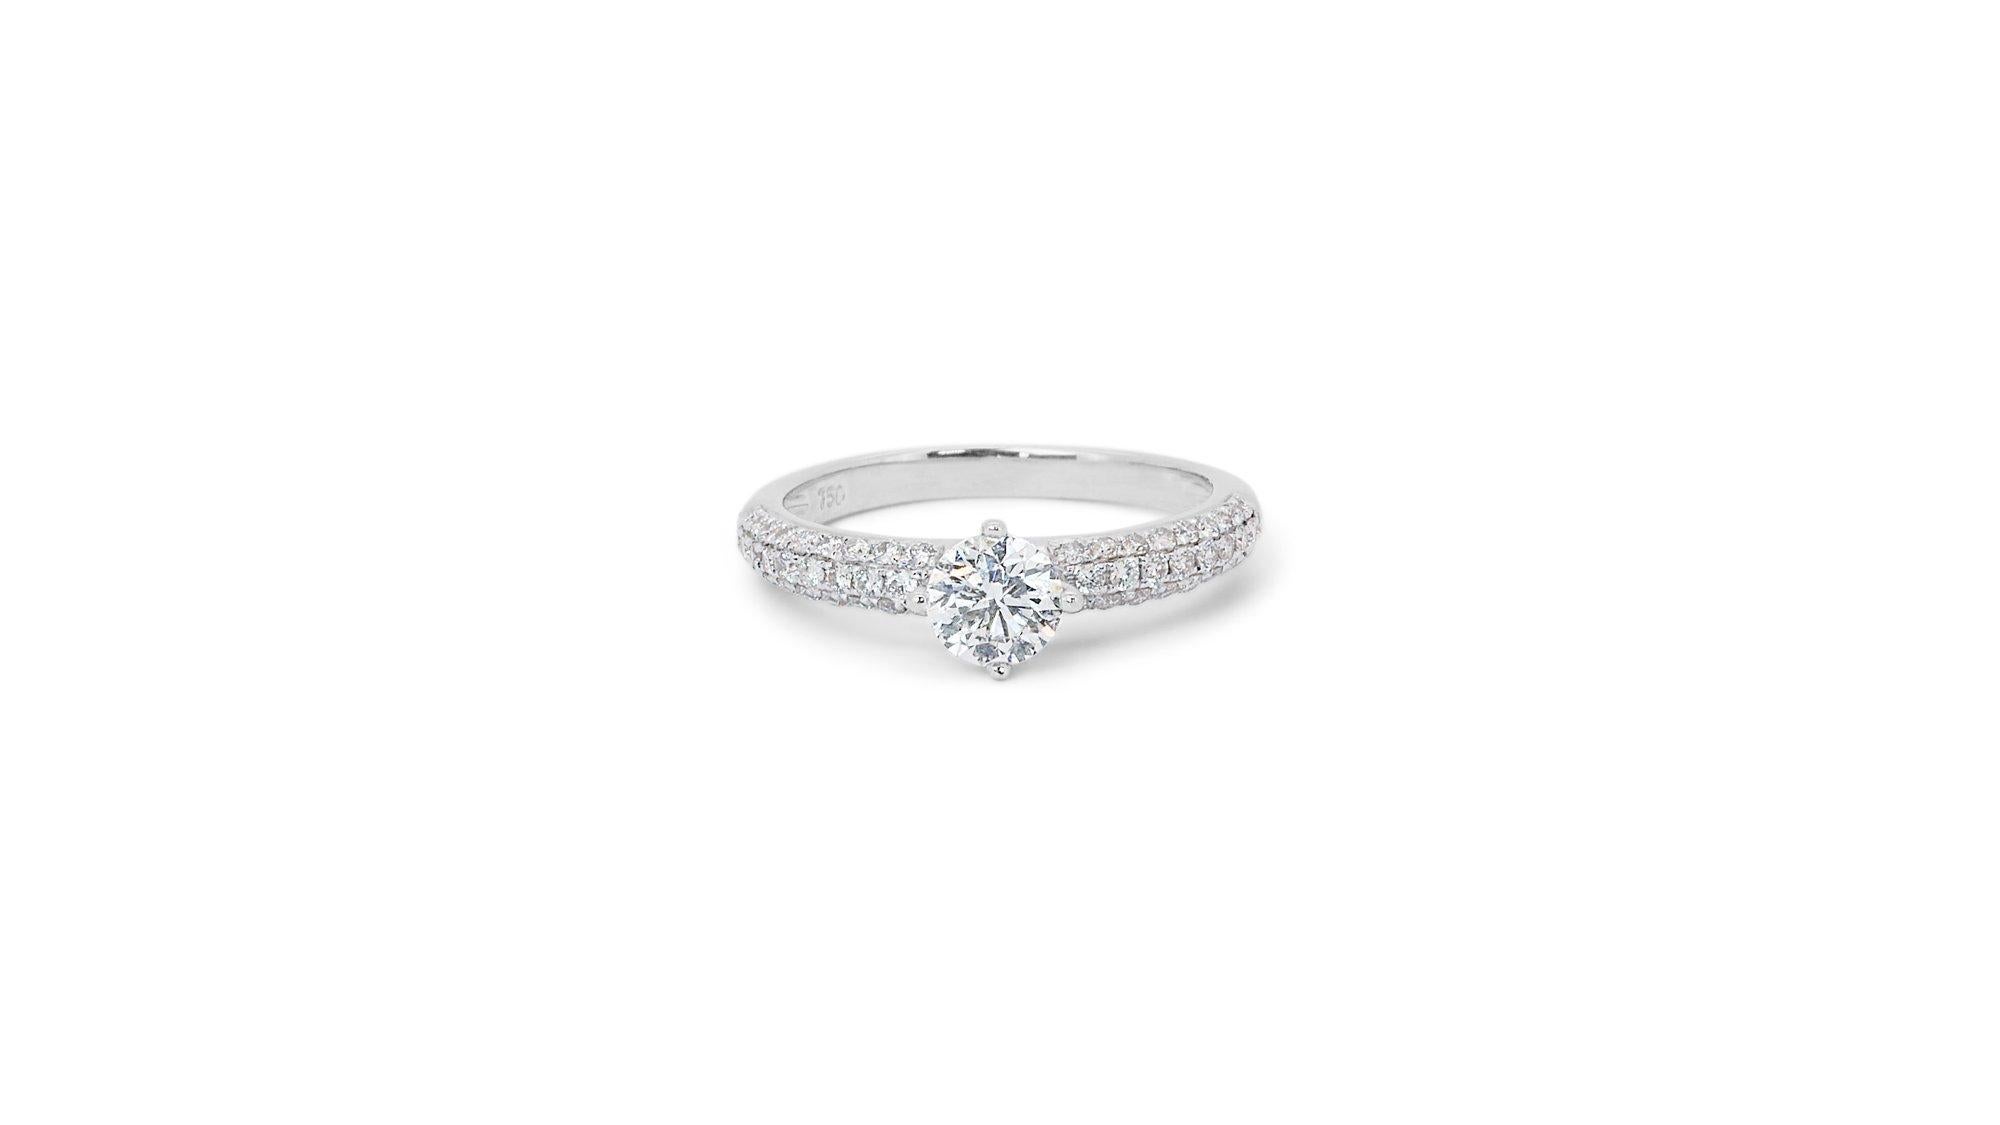 A fabulous Pave Ring with a dazzling 0.6-carat Round Brilliant natural diamond. It has 0.3 carats of side diamonds which add more to its elegance. The jewelry is made of 18K White Gold with a high-quality polish. It comes with an IGI certificate and